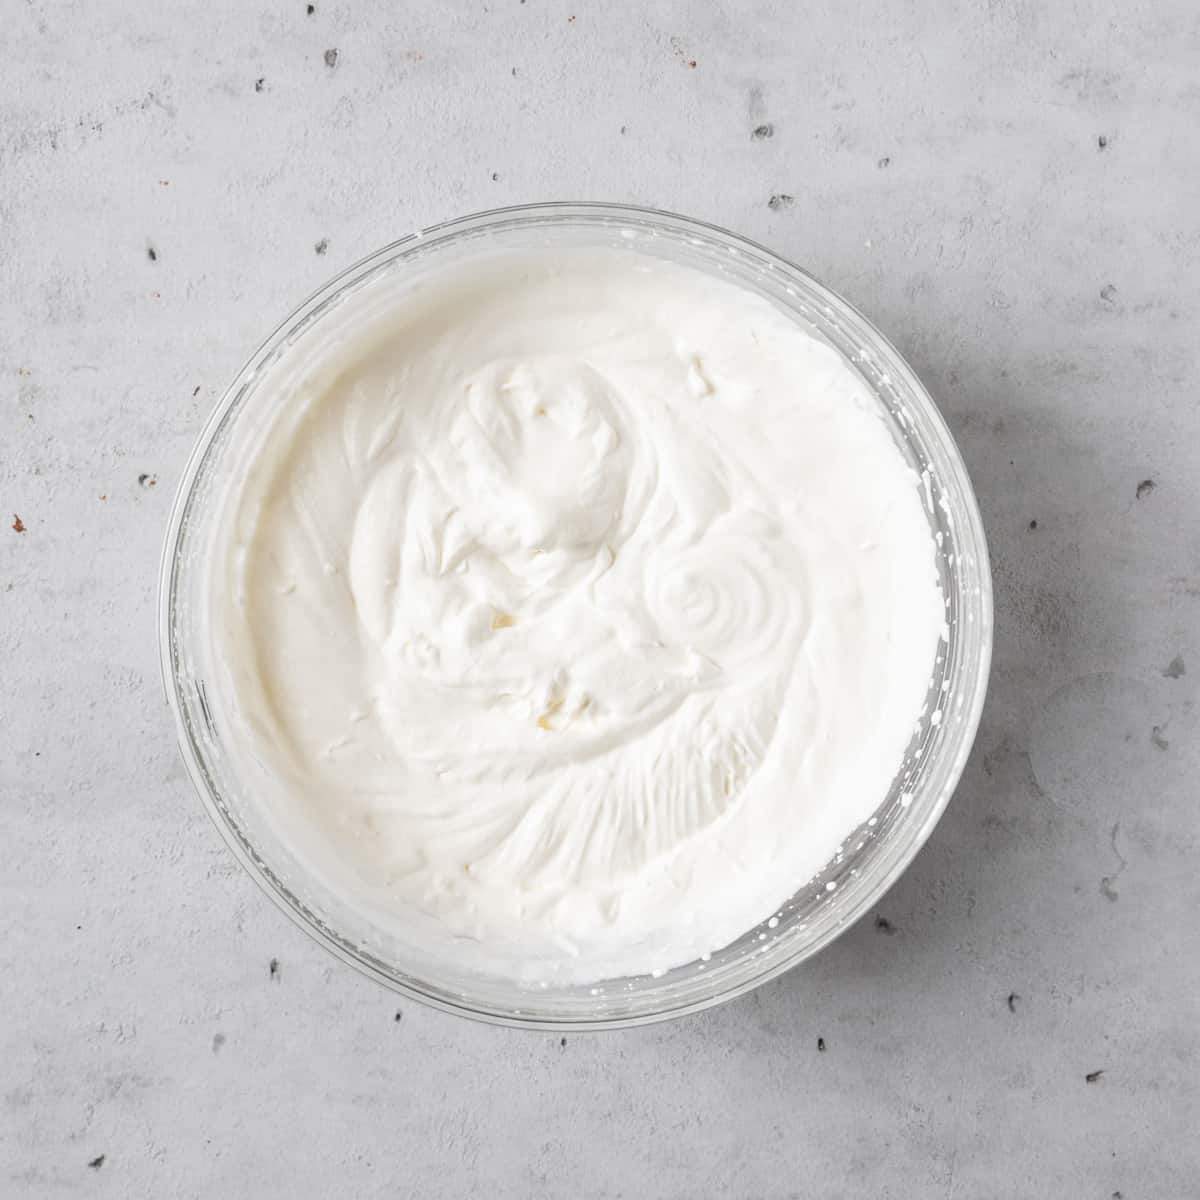 the whipped cream beat to stiff peaks in a glass bowl on a grey background.